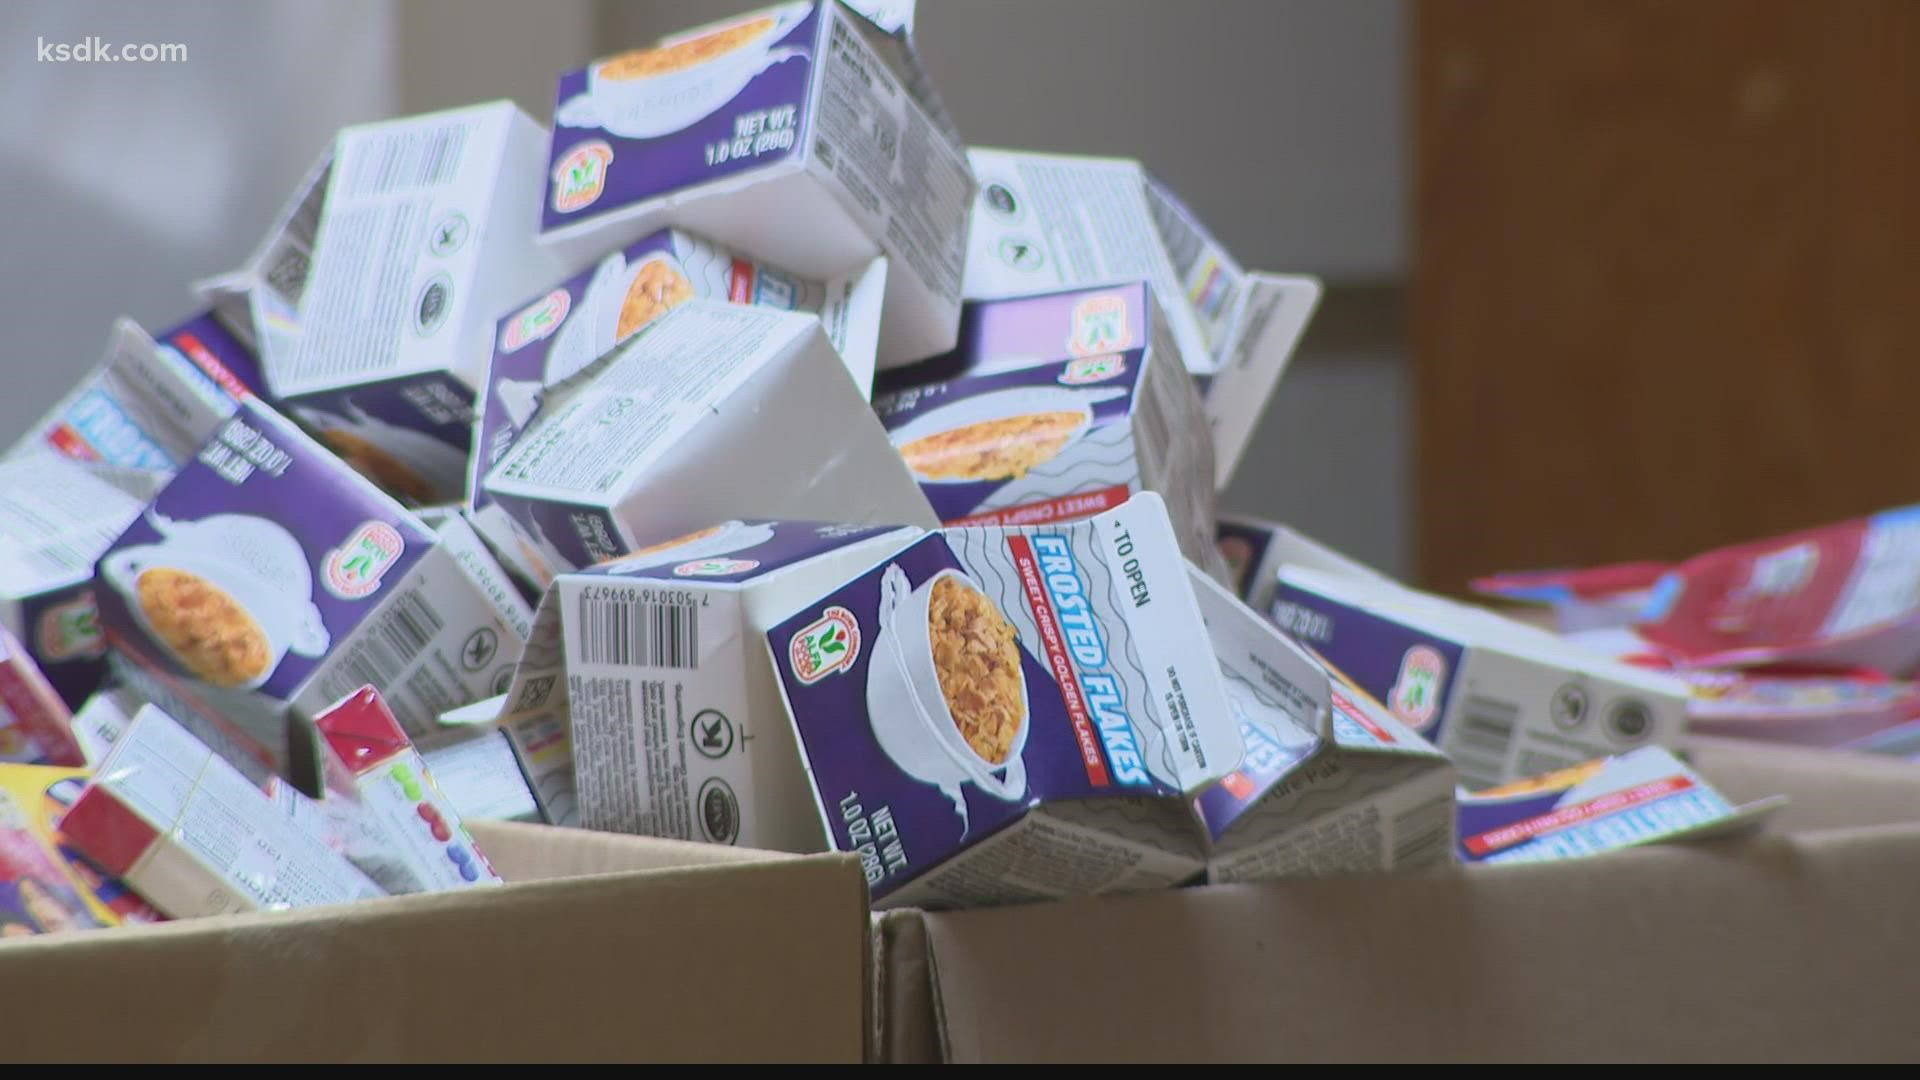 Food pantries across the country are reporting shortages, supply chain issues, and higher prices. But two St. Louis area facilities say they're beating the odds.